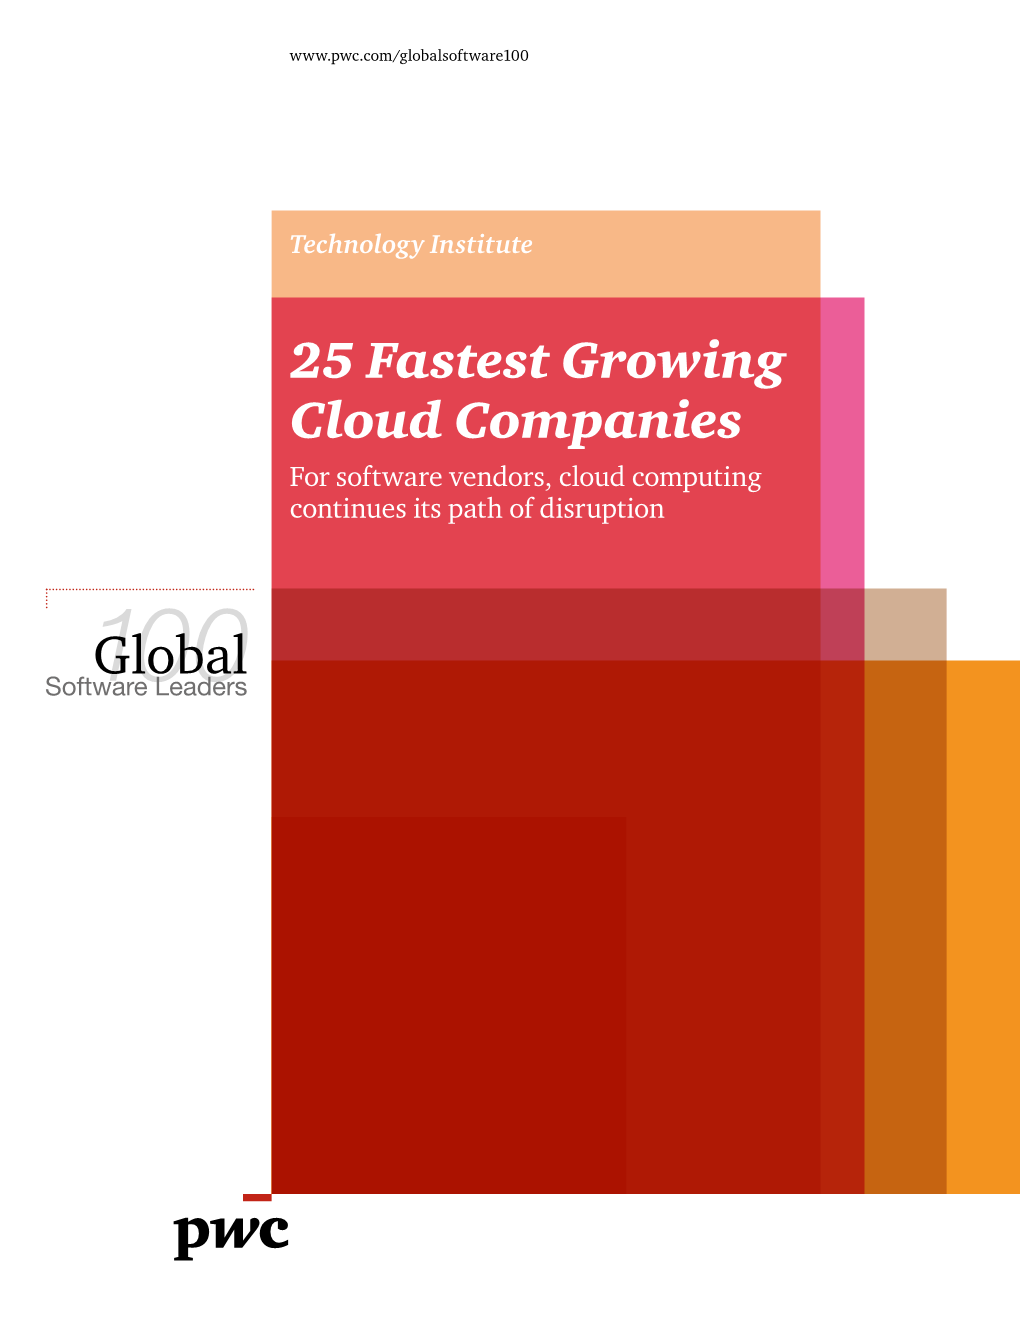 25 Fastest Growing Cloud Companies for Software Vendors, Cloud Computing Continues Its Path of Disruption Executive Summary